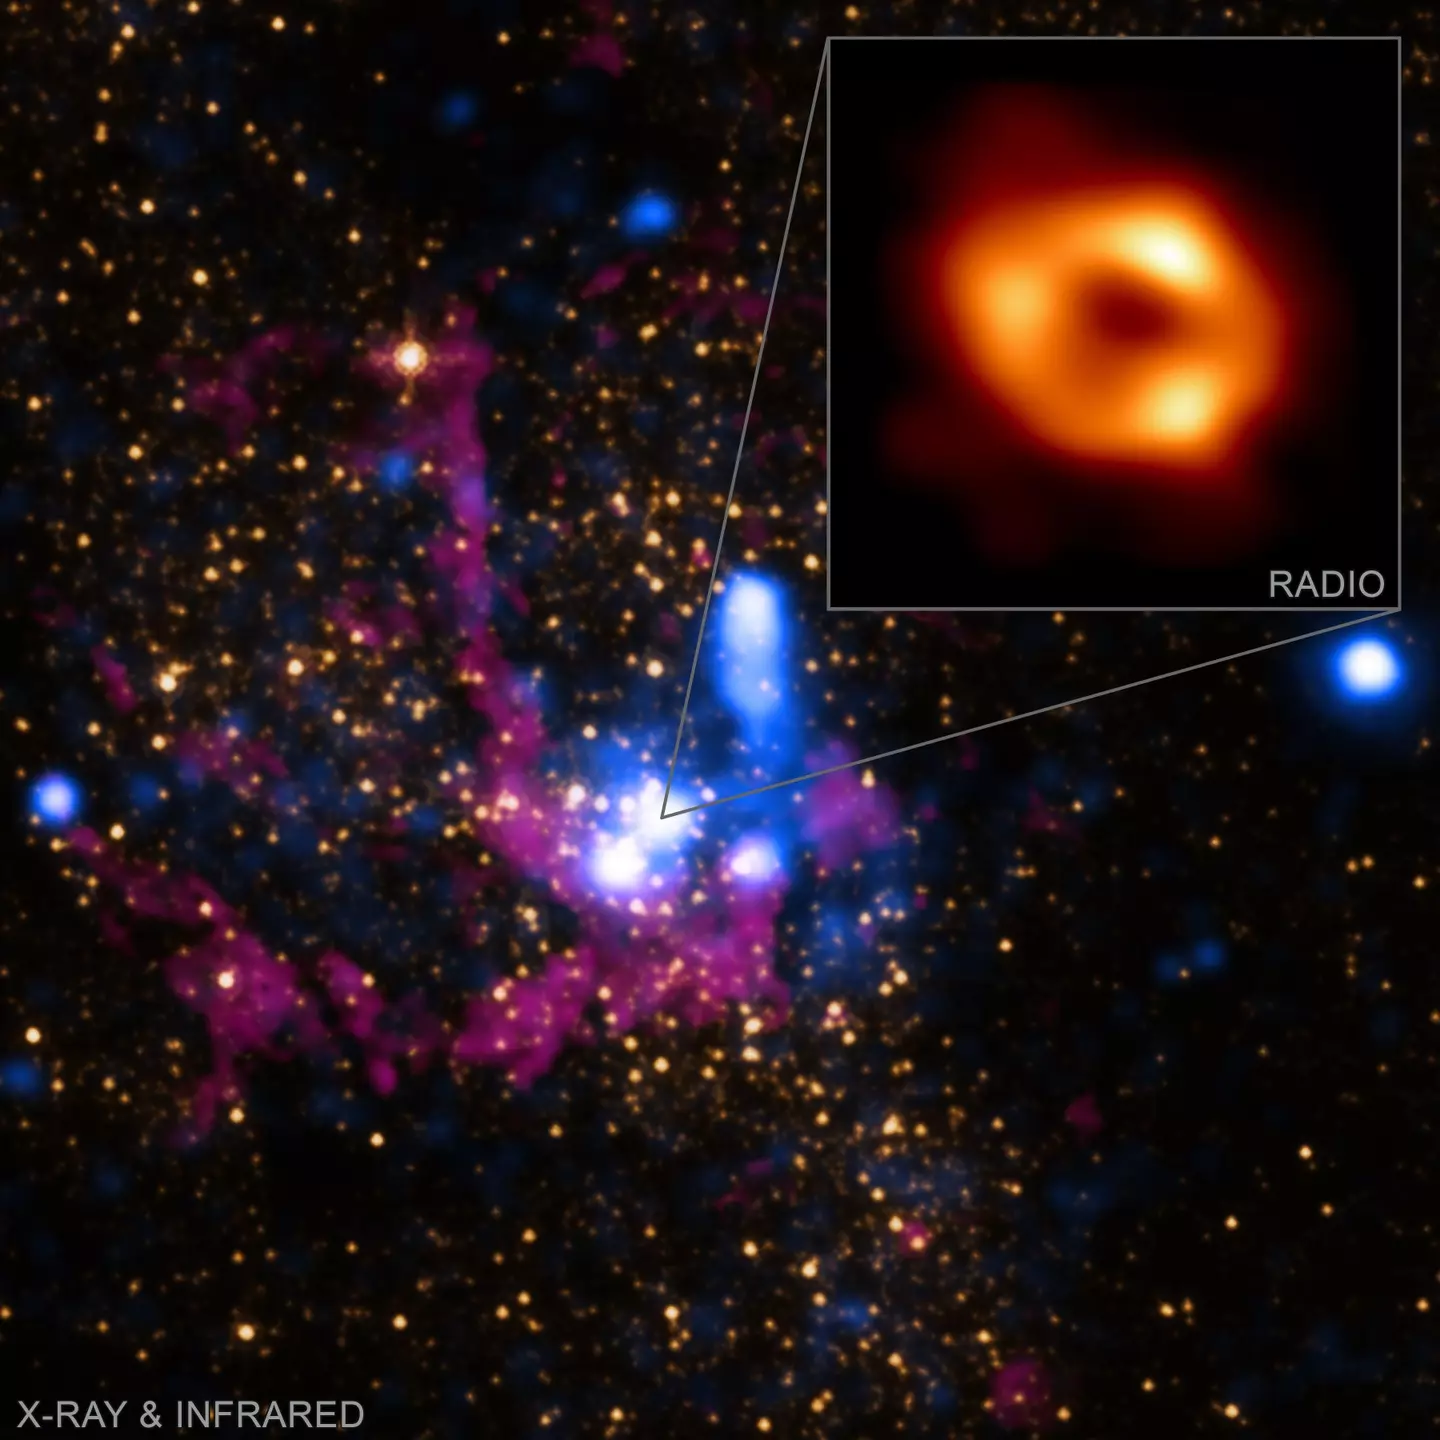 NEOWISE's data has improved understanding of black holes.